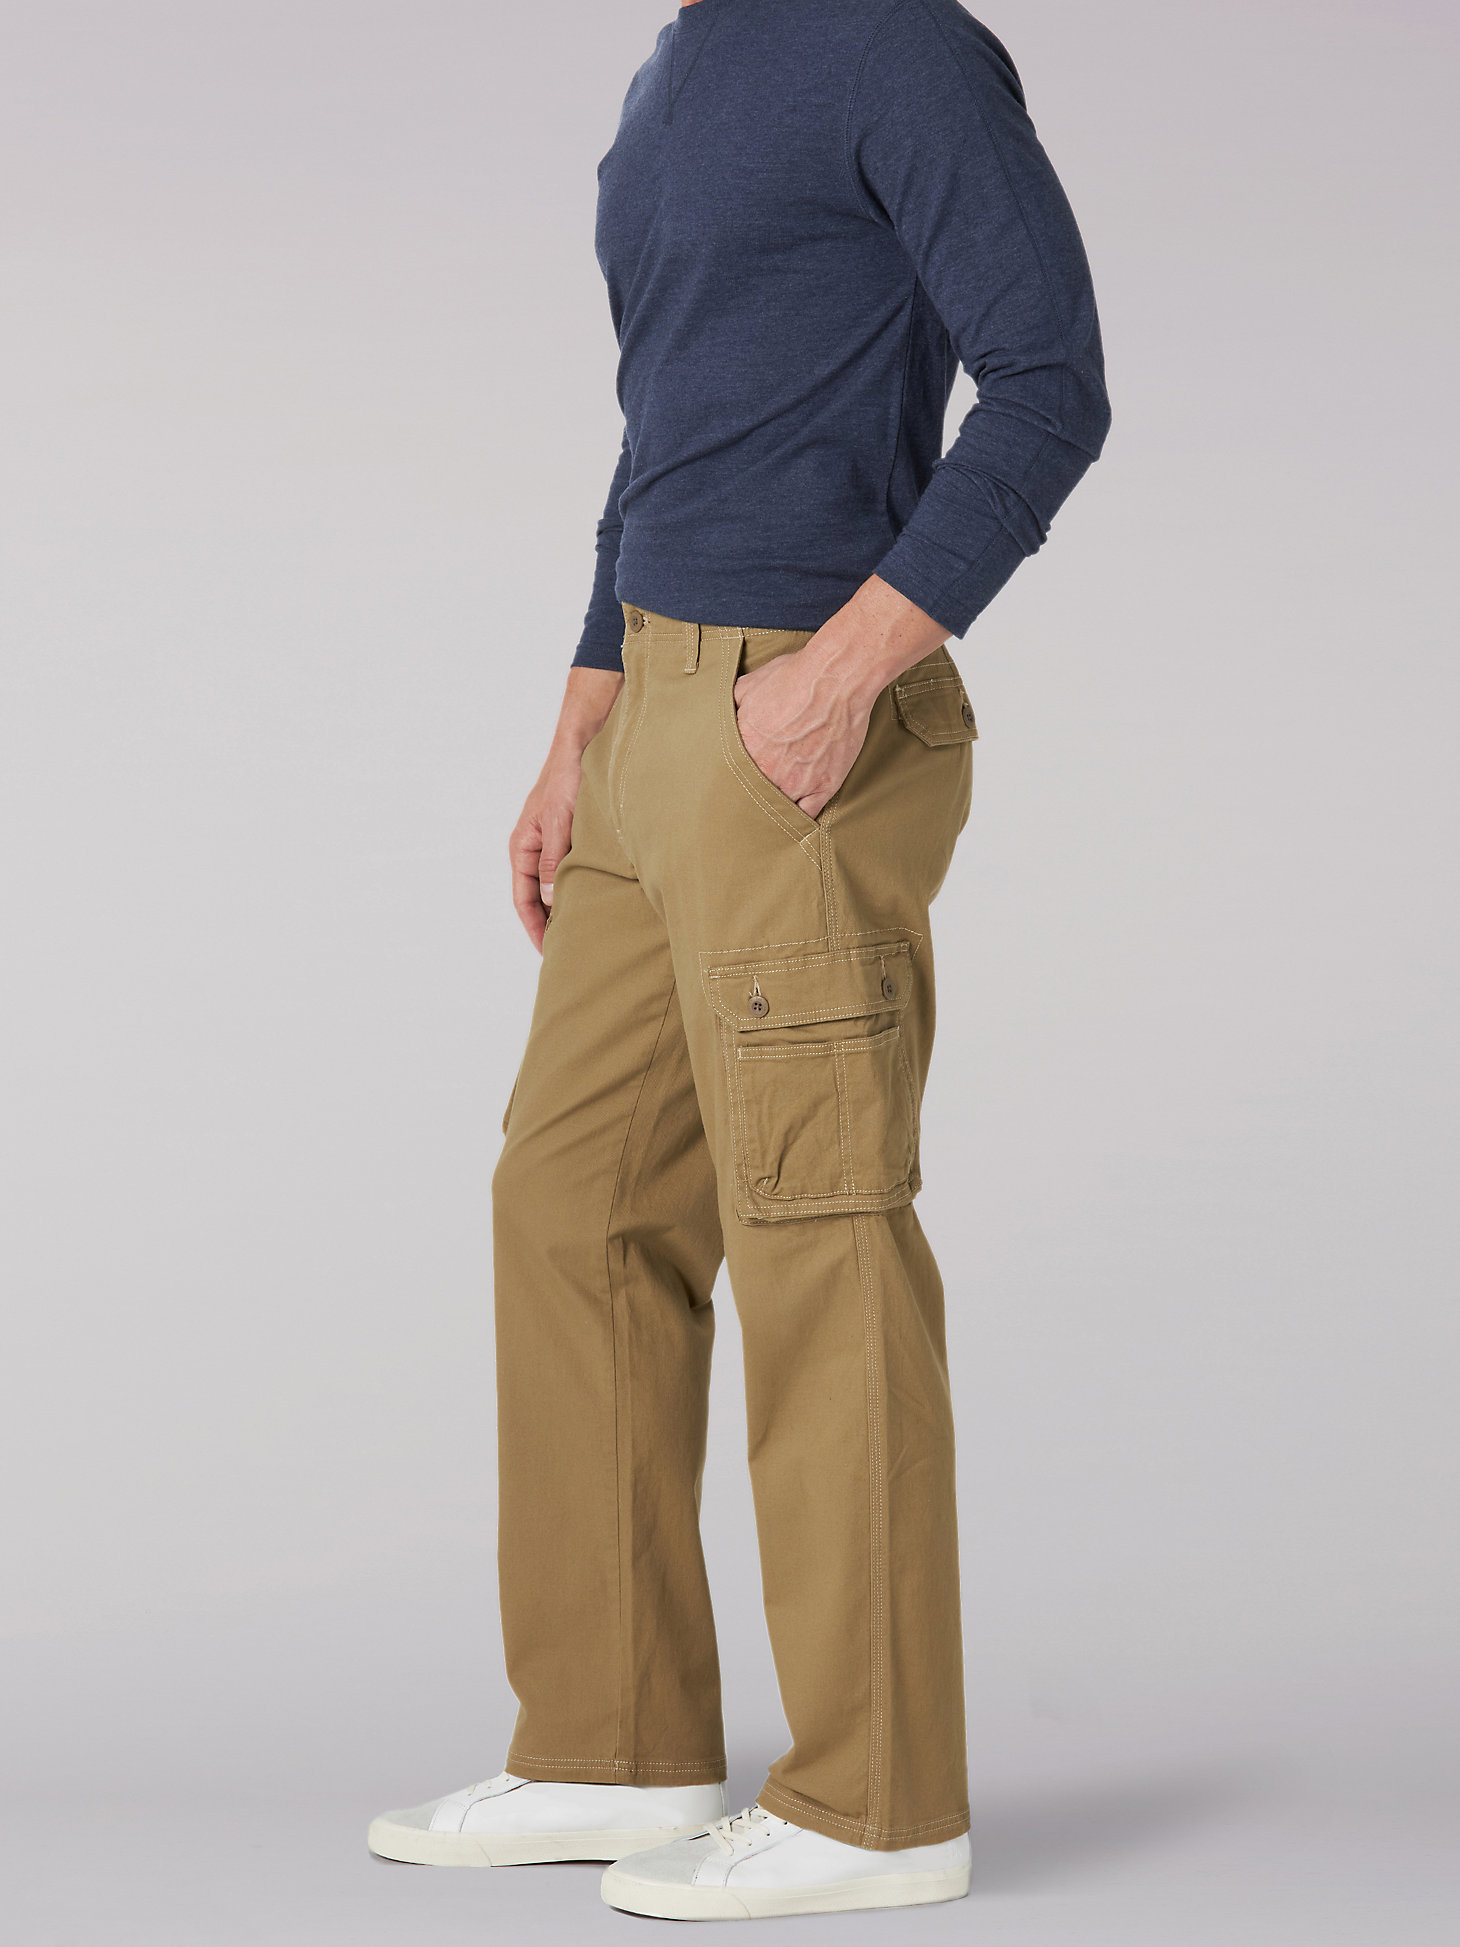 Men's Wyoming Relaxed Fit Cargo Twill Pant in Nomad alternative view 2